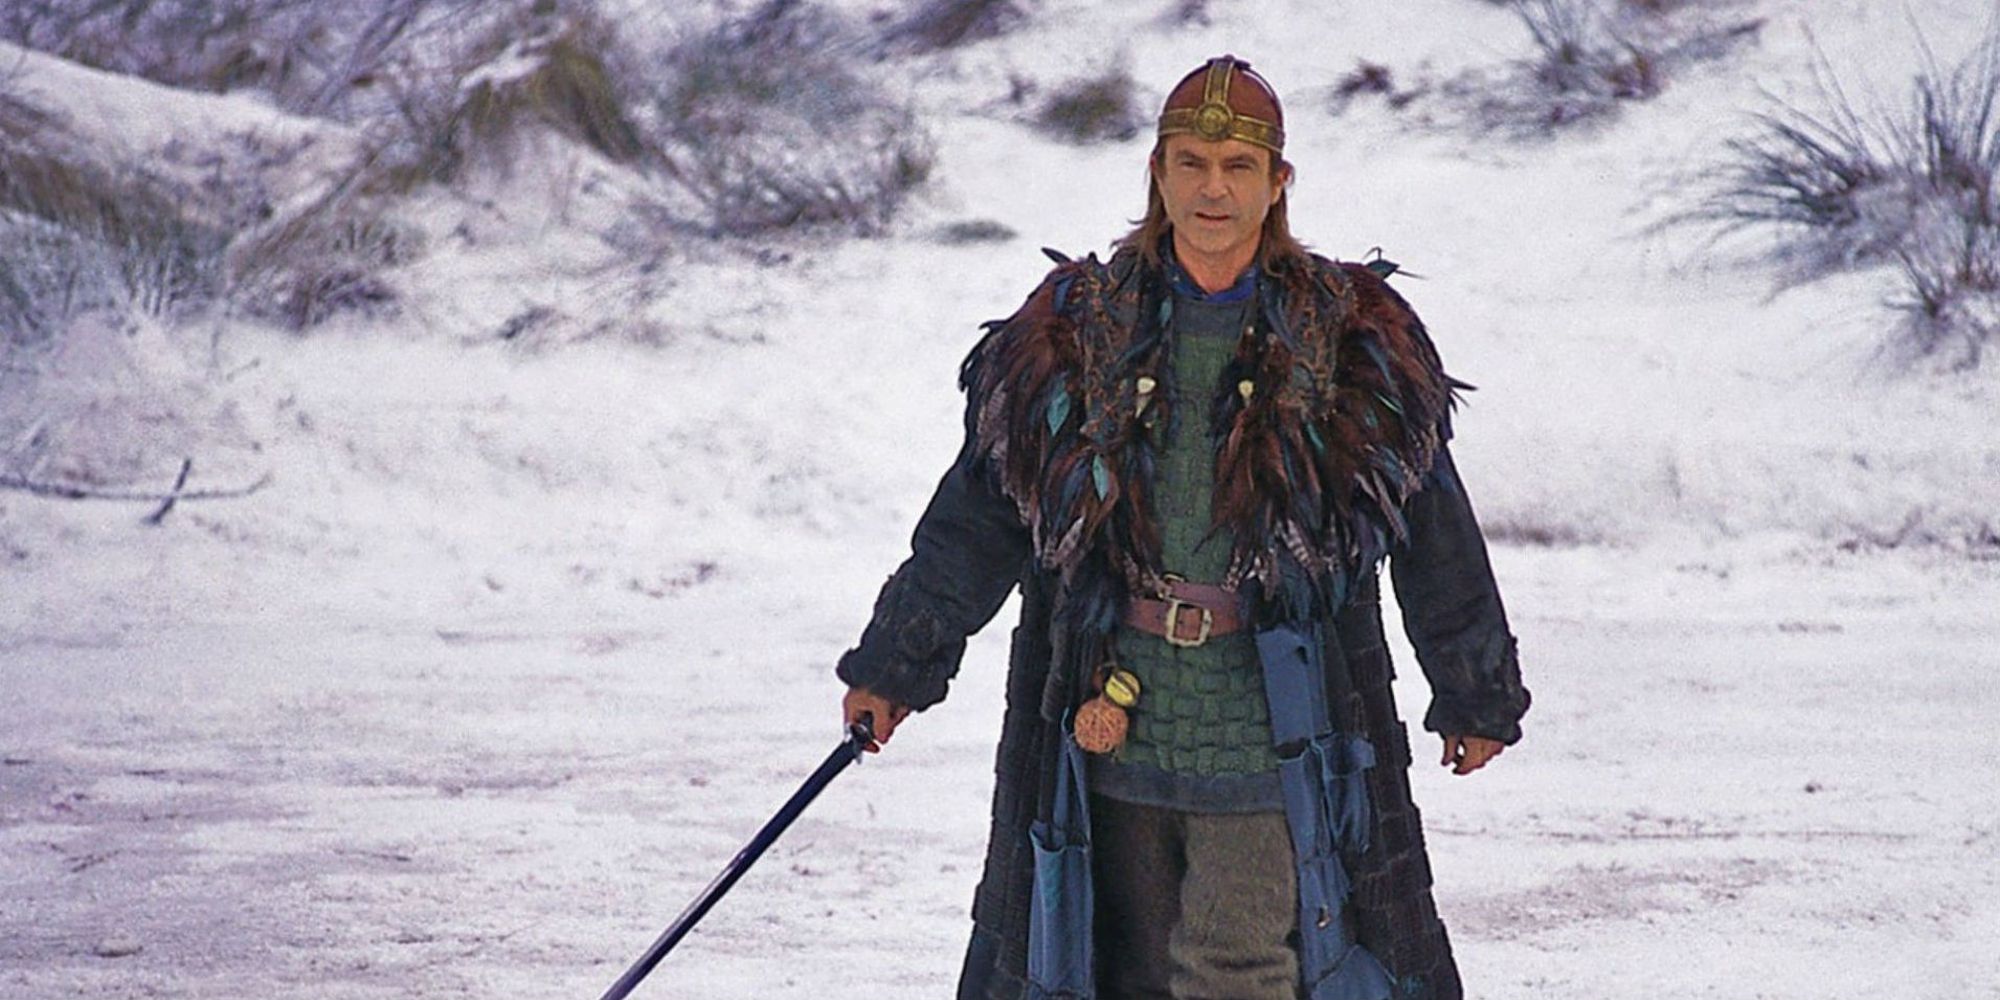 Sam Neill with a sword in the snow in the 1998 fantasy film Merlin.